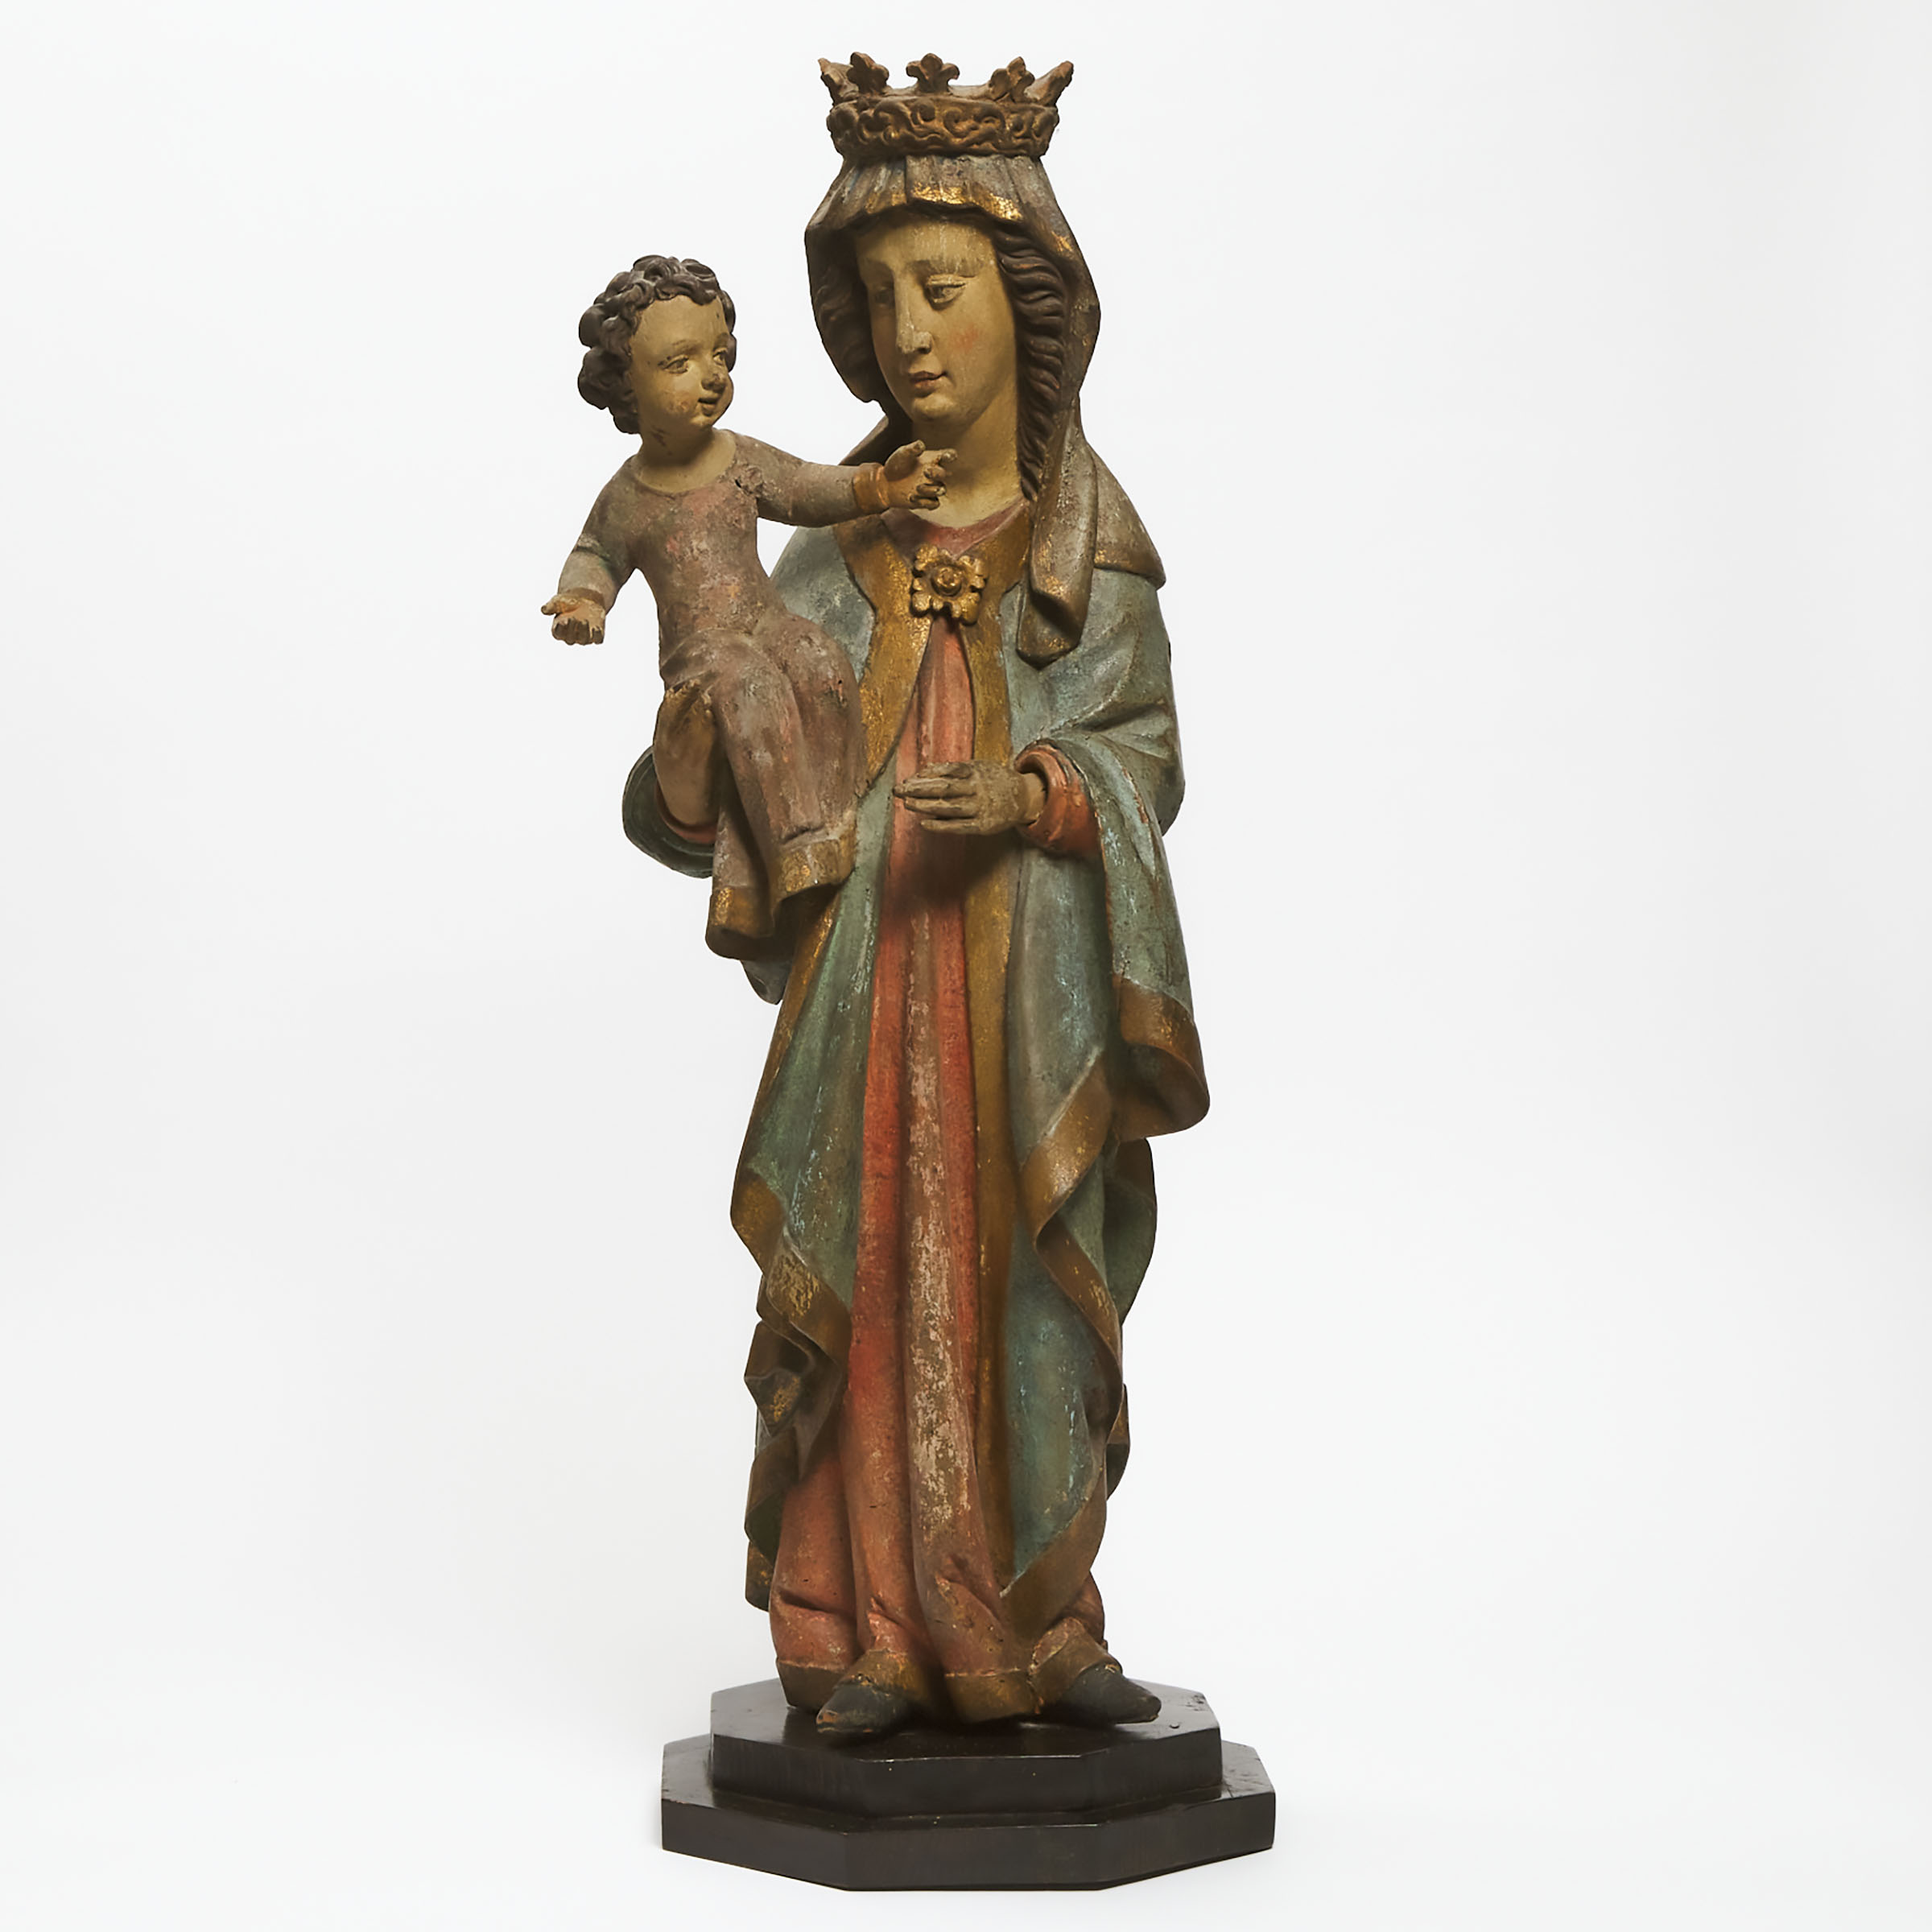 South German Baroque Carved, Polychromed and Parcel Gilt Group of the Madonna and Child, 17th century or earlier